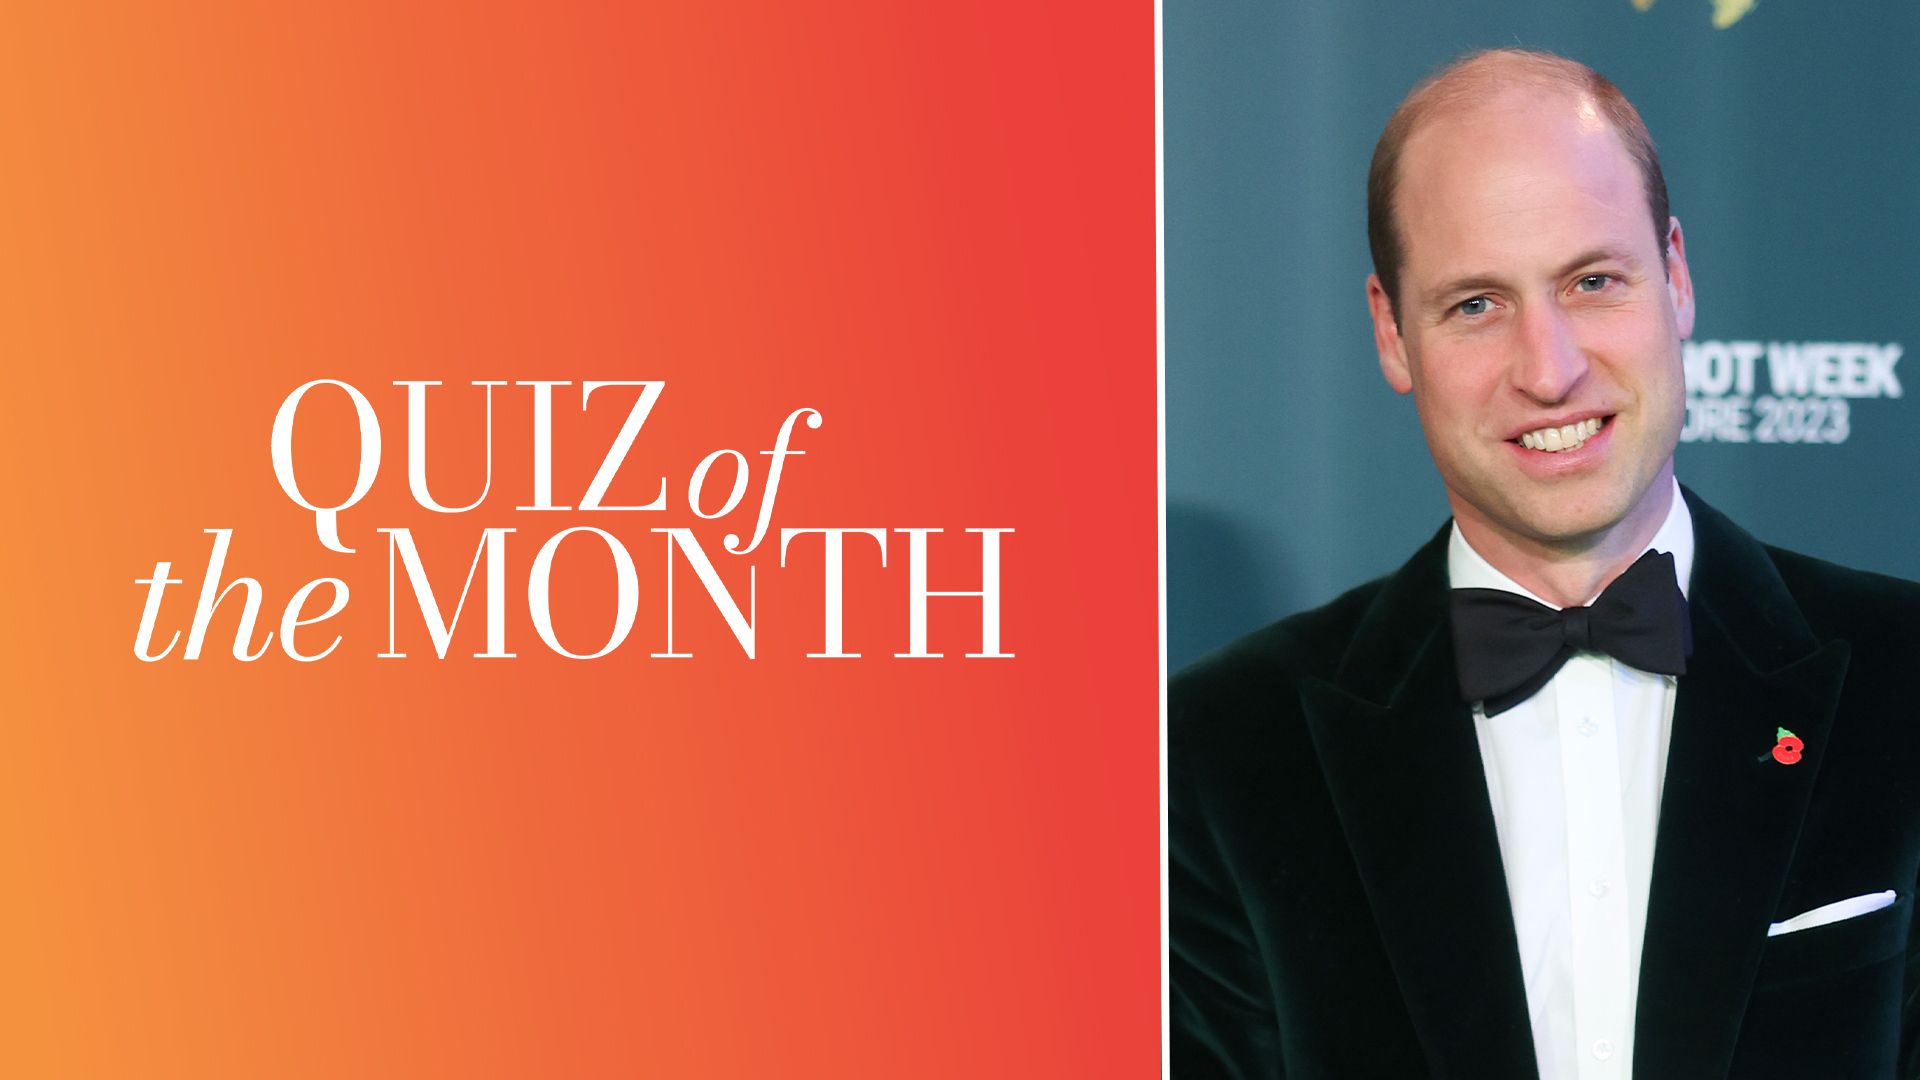 Smiling Prince William in a tuxedo and Quiz of the Month logo